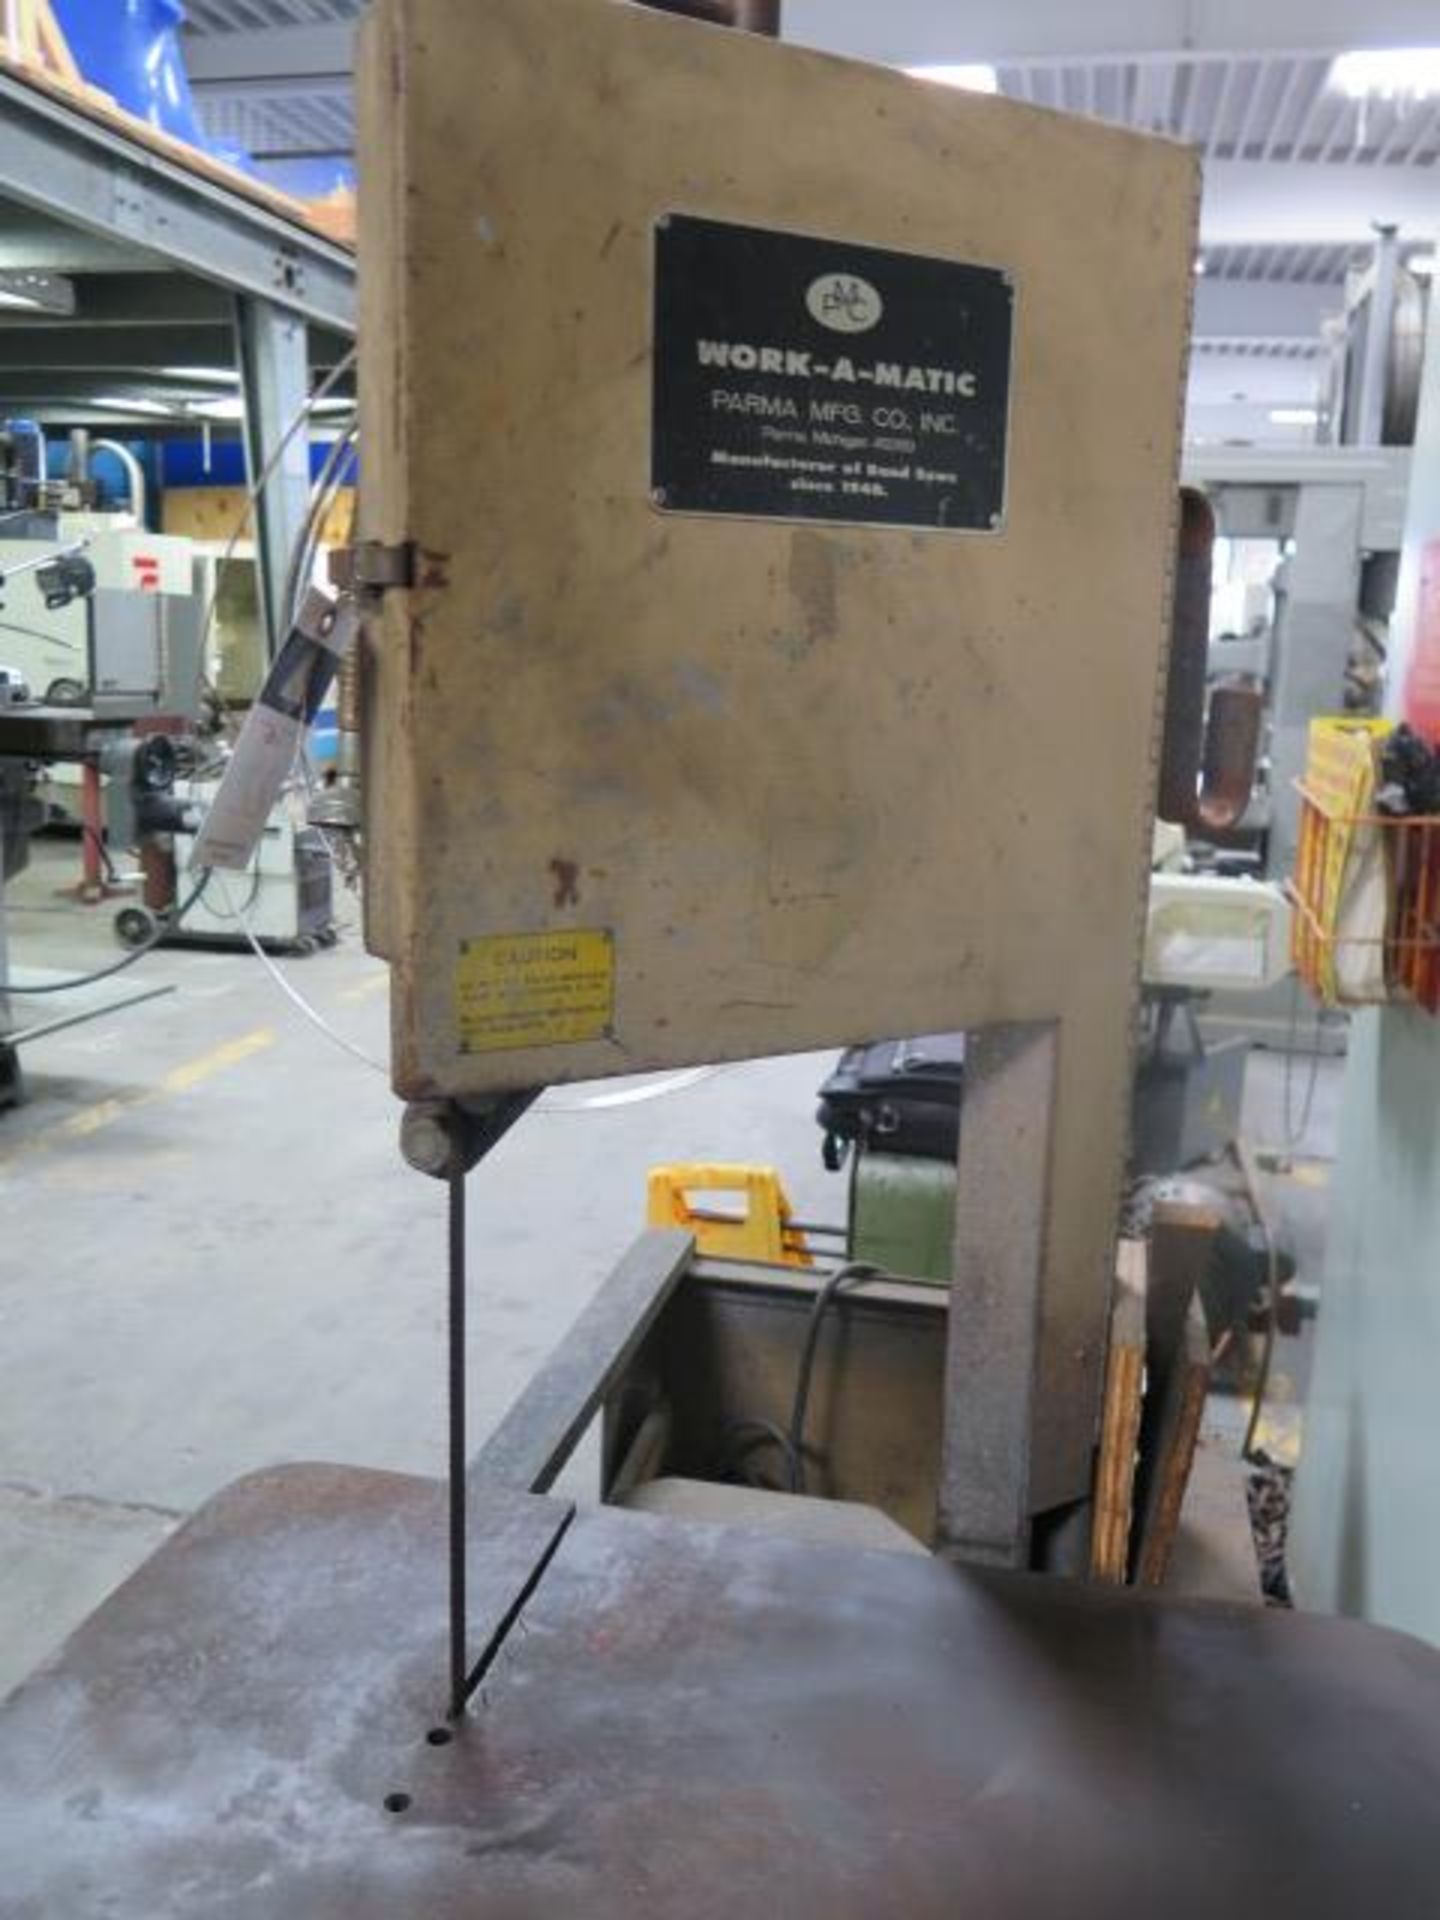 PMC “Work-A-Matic” 9” Vertical Band Saw w/ 18” x 29” Table (SOLD AS-IS - NO WARRANTY) - Image 3 of 5